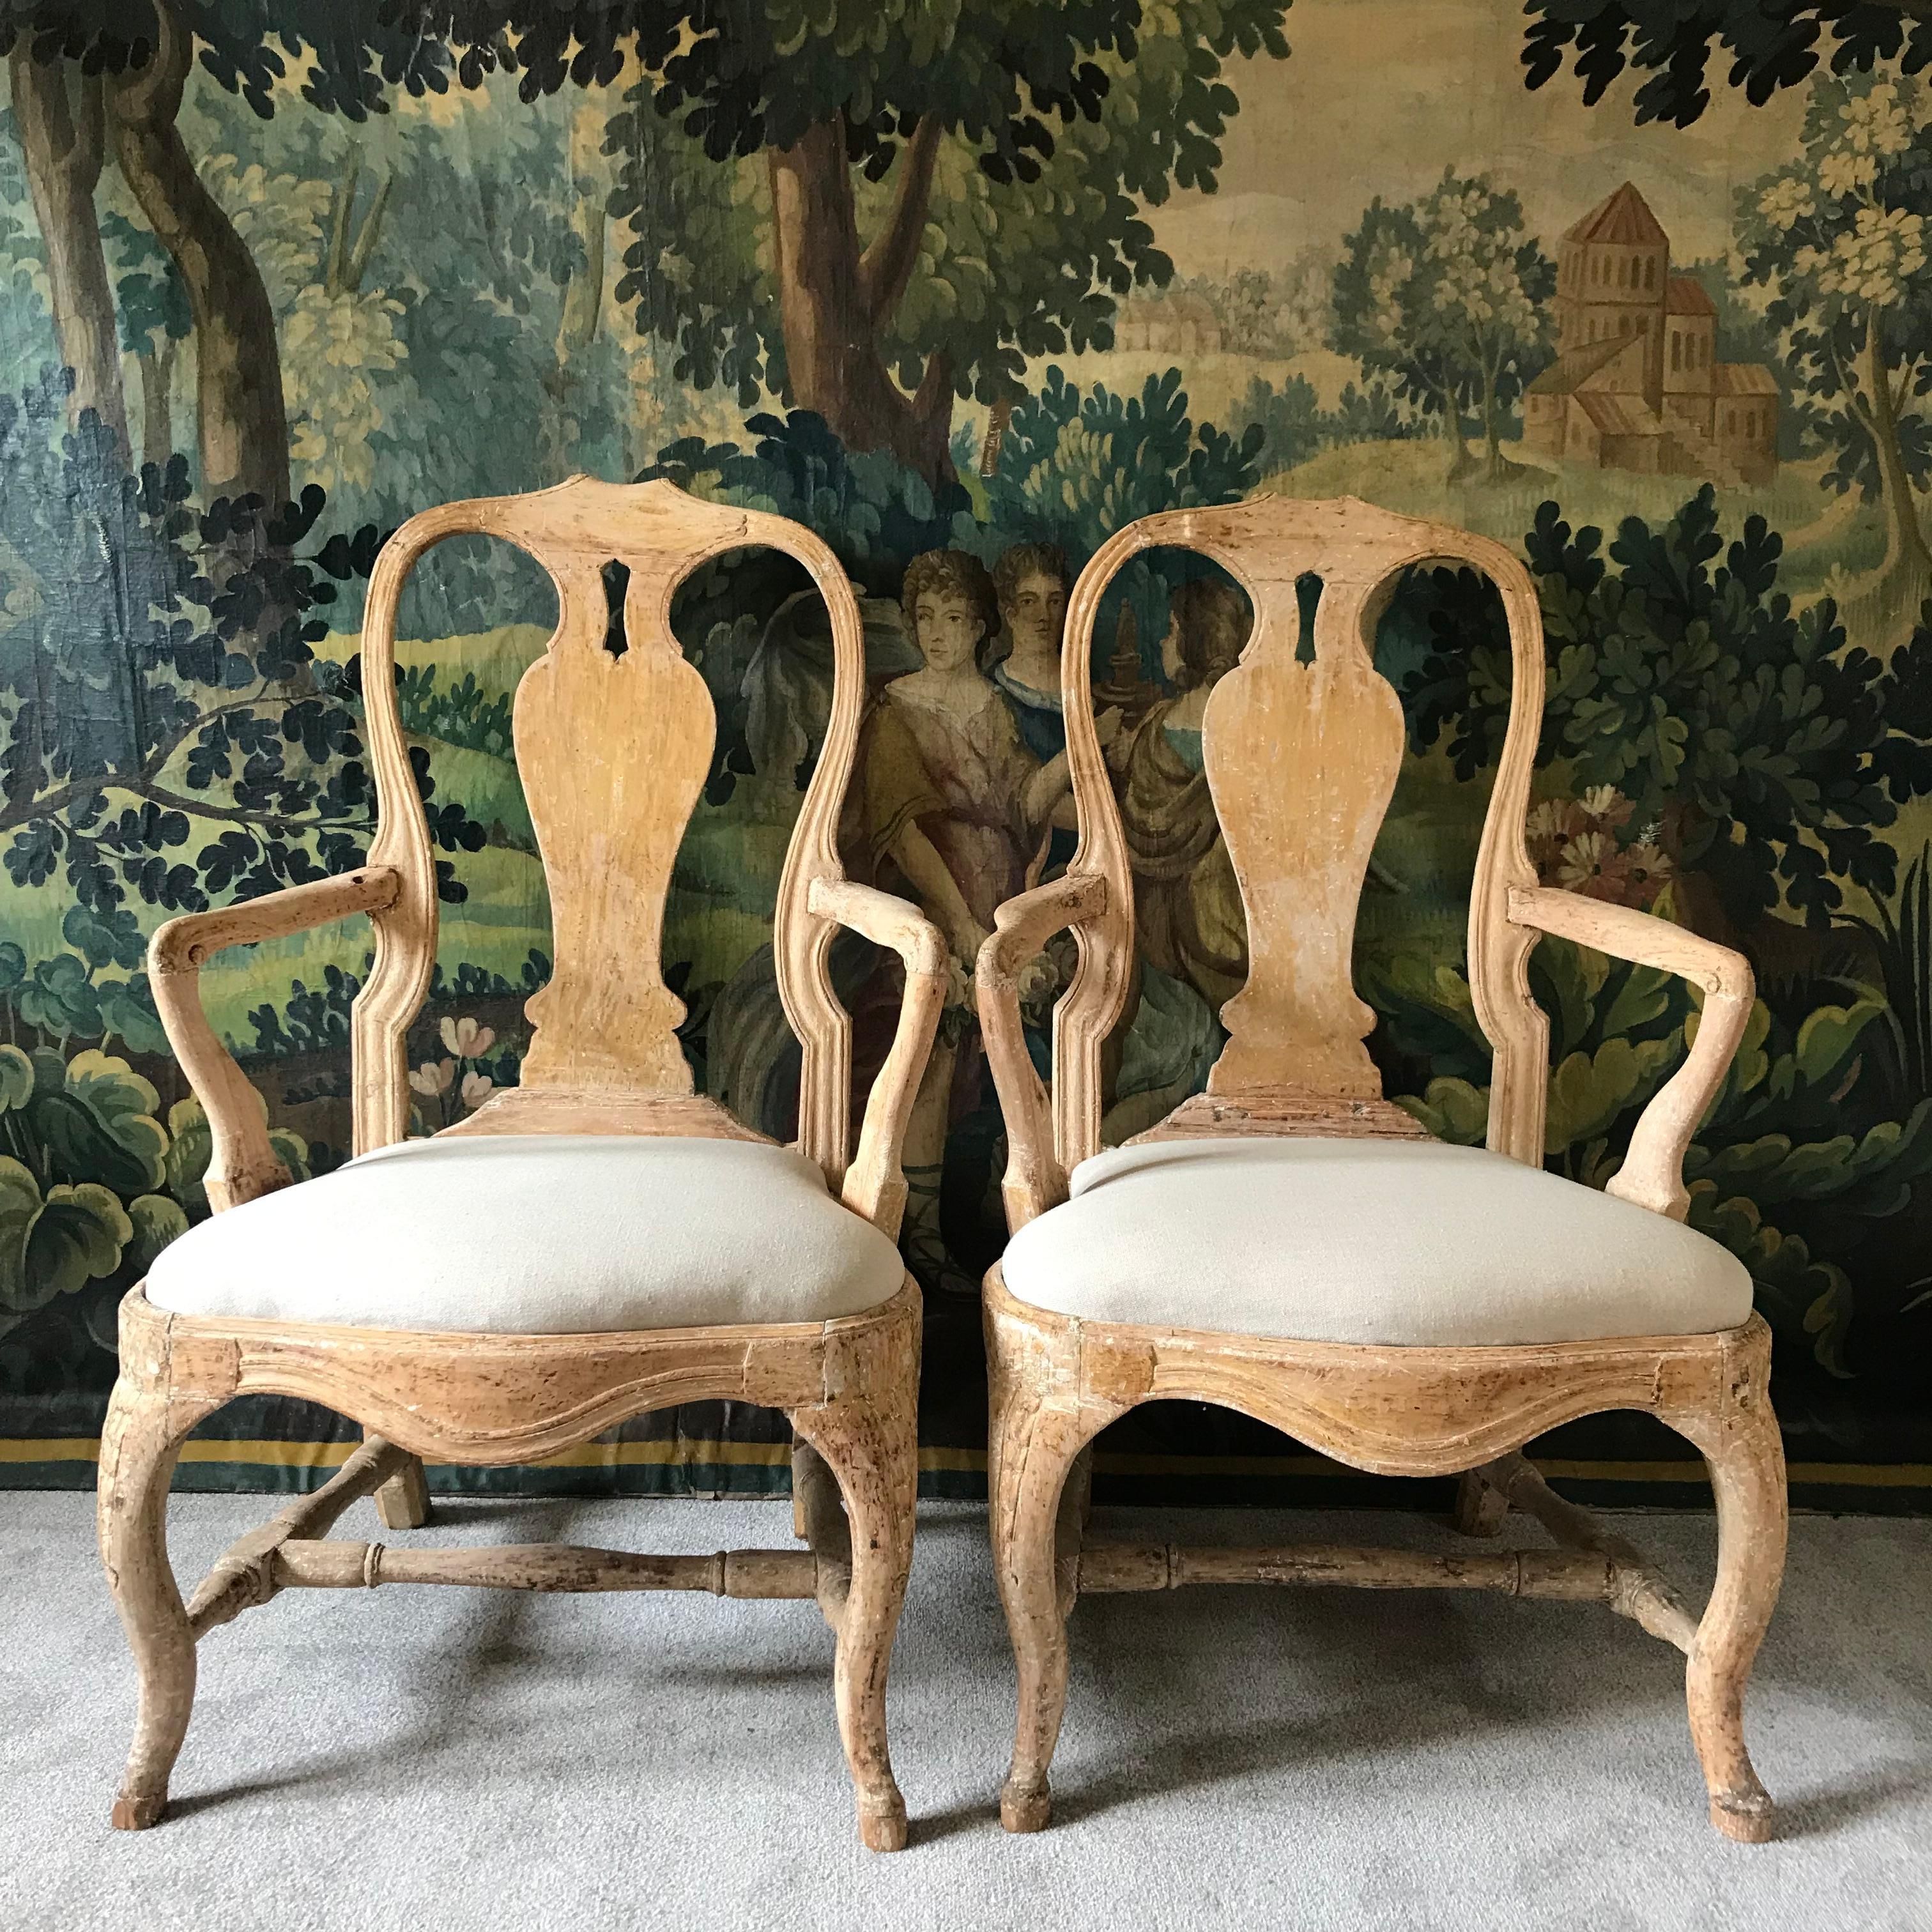 A superb pair of 18th century Swedish period rococo armchairs in their original paint (not retouched or repainted) with hand carved details they are a glorious yellow ochre colour 
This pair of chairs are hand carved and therefore they vary